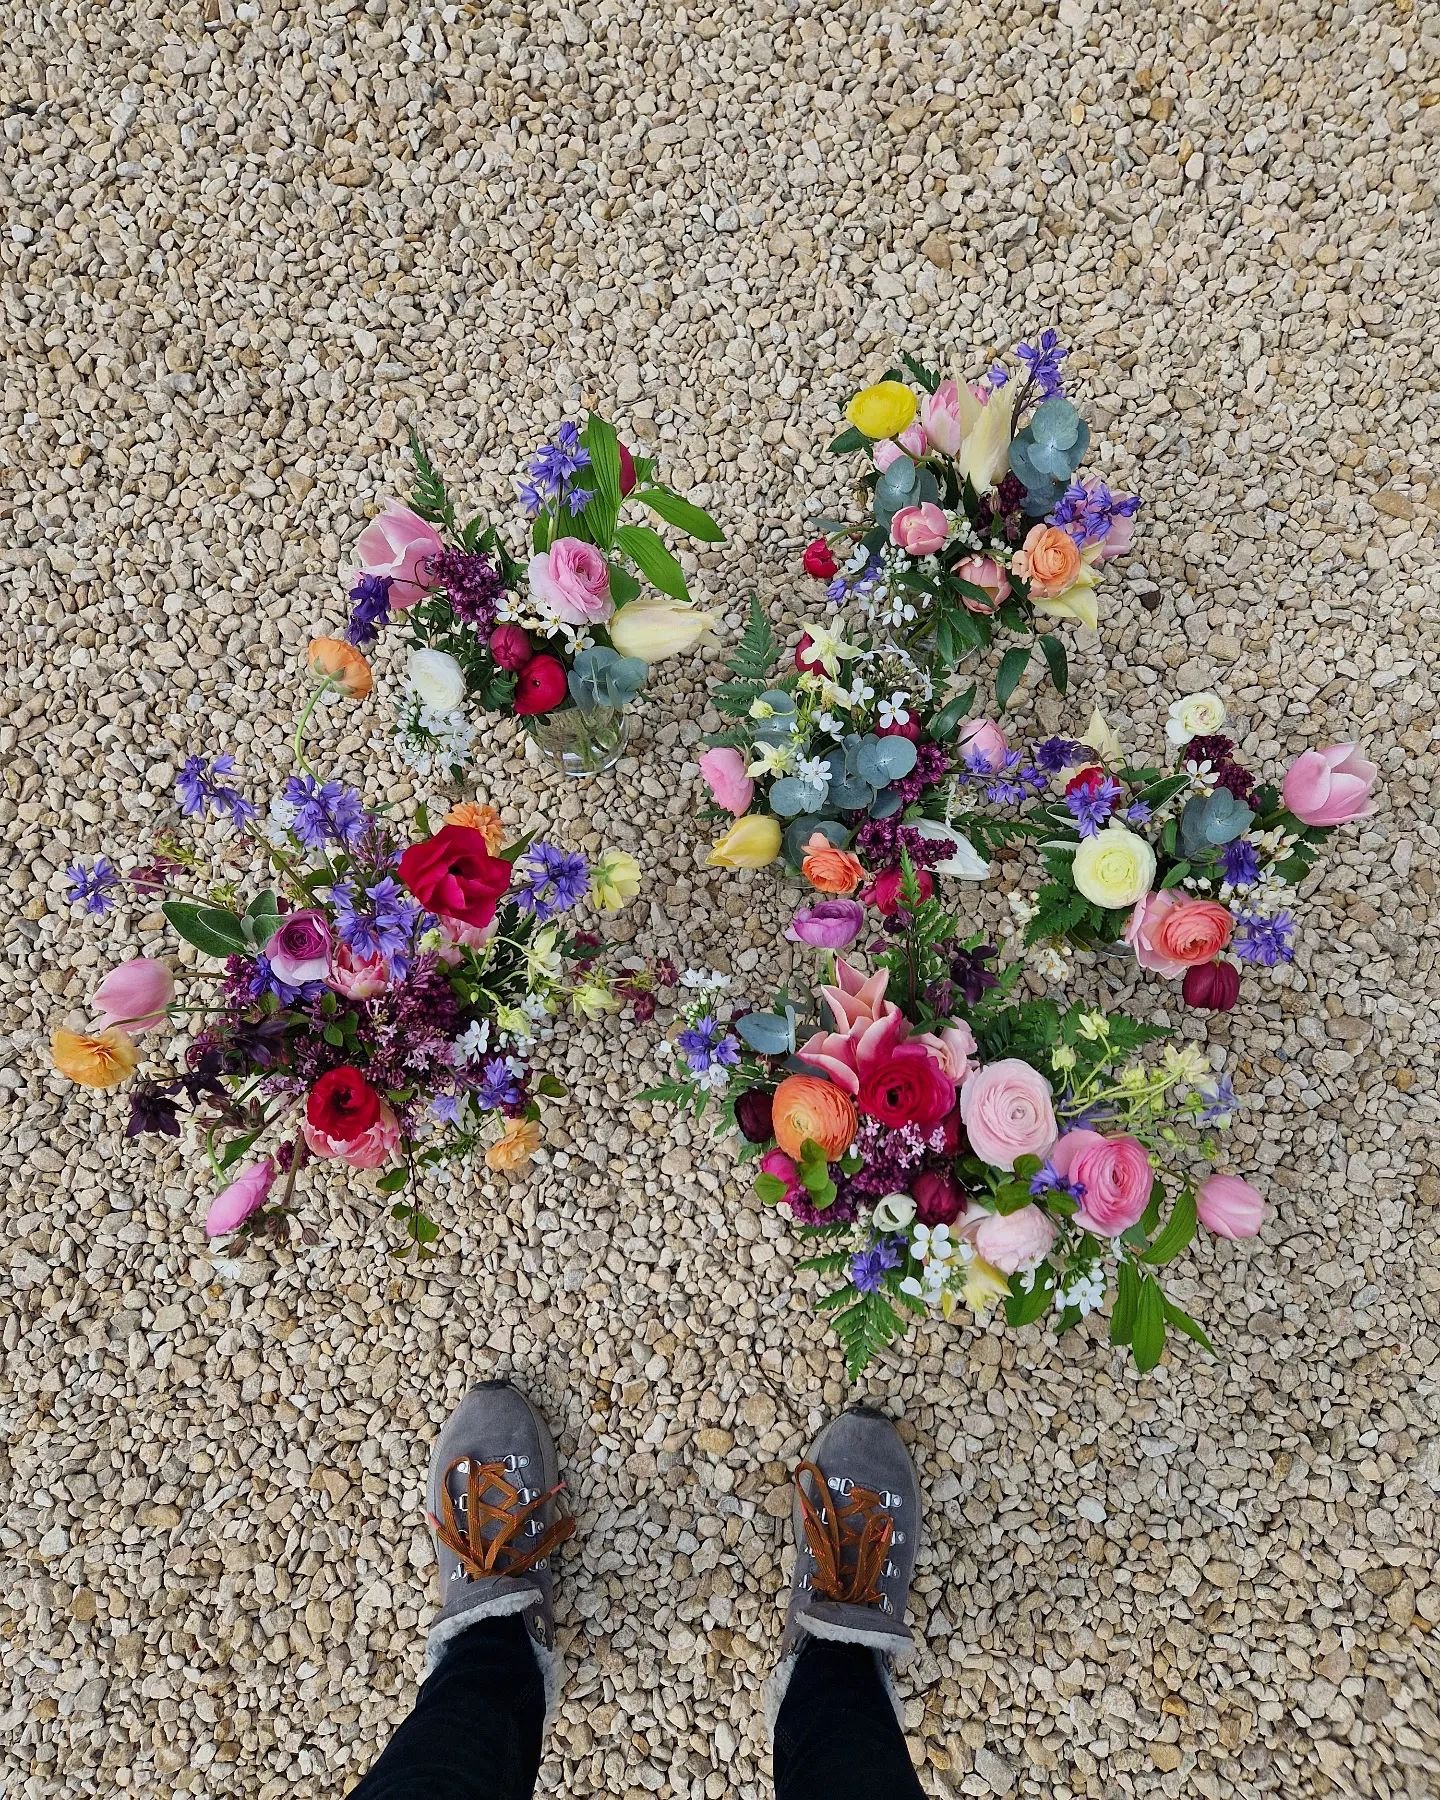 A quick overhead shot of the bouquets before handover at last weekend's wedding @hamswellhouse 

#bristolwedding ##bristolflorist #hamswellhouse #grownnotflown #growninbristol #britishflowers #fromwhereistand #weddingbouquet #weddingflorist #weddingf